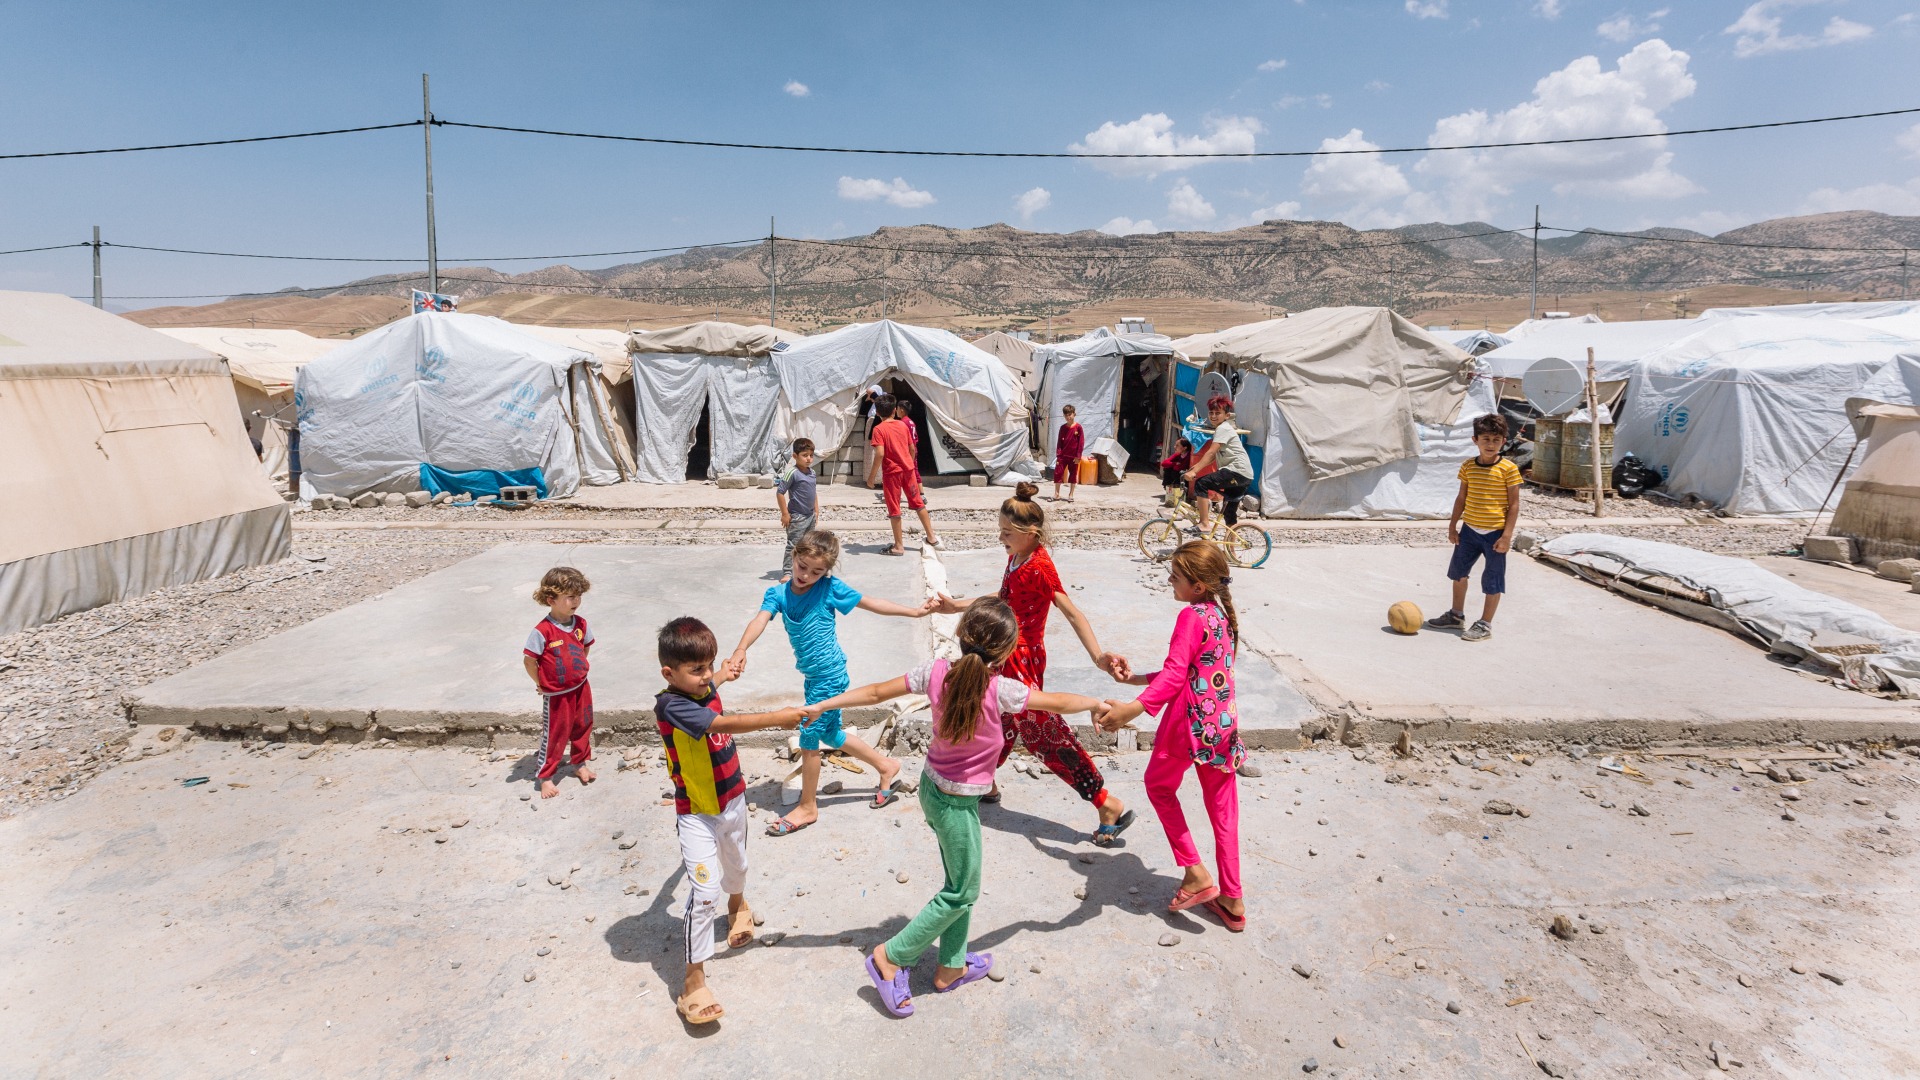 In a displacement camp in Iraq, children hold hands in a circle and play together.